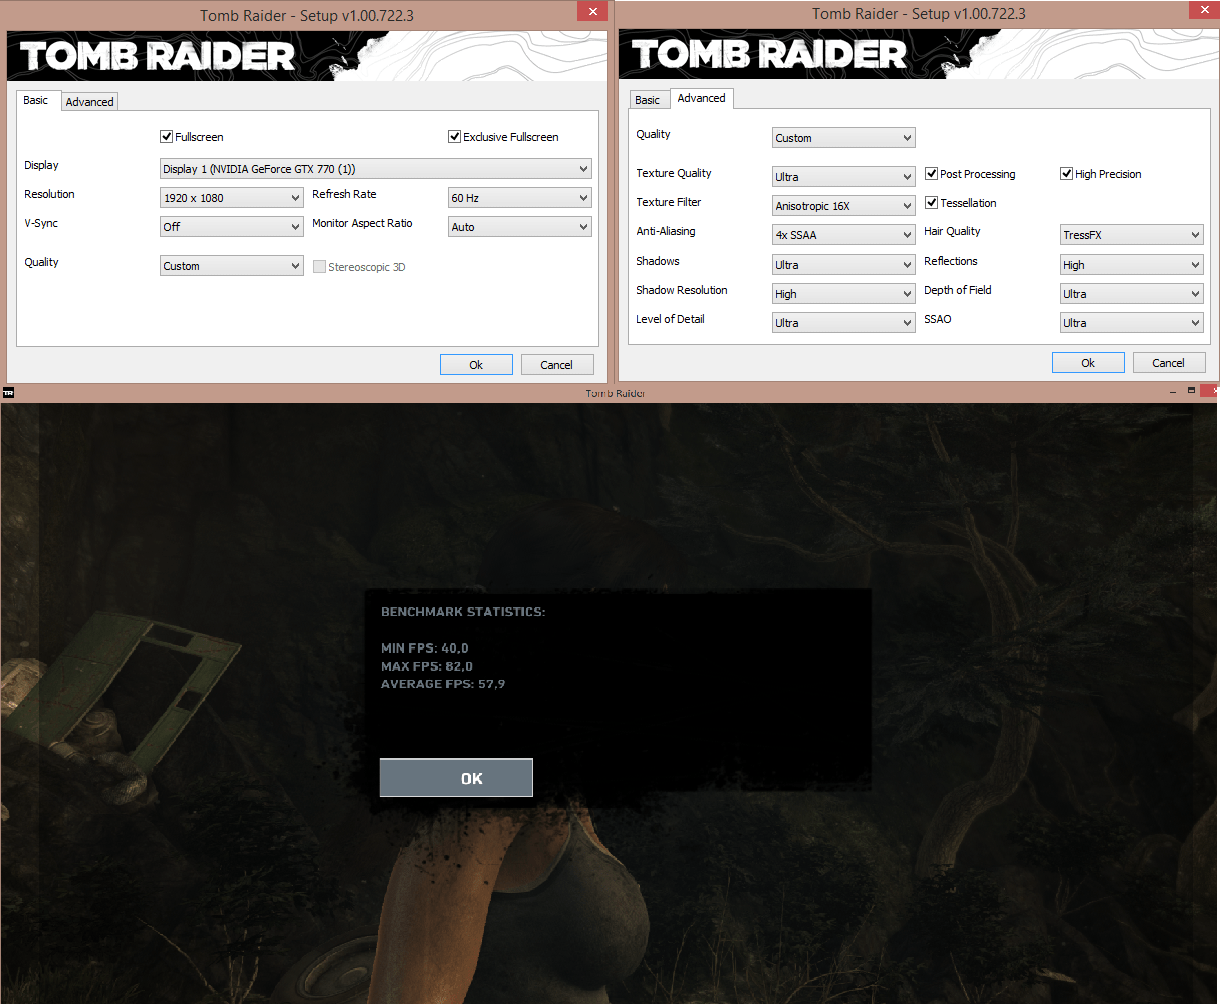 gtx770-tombraider.png